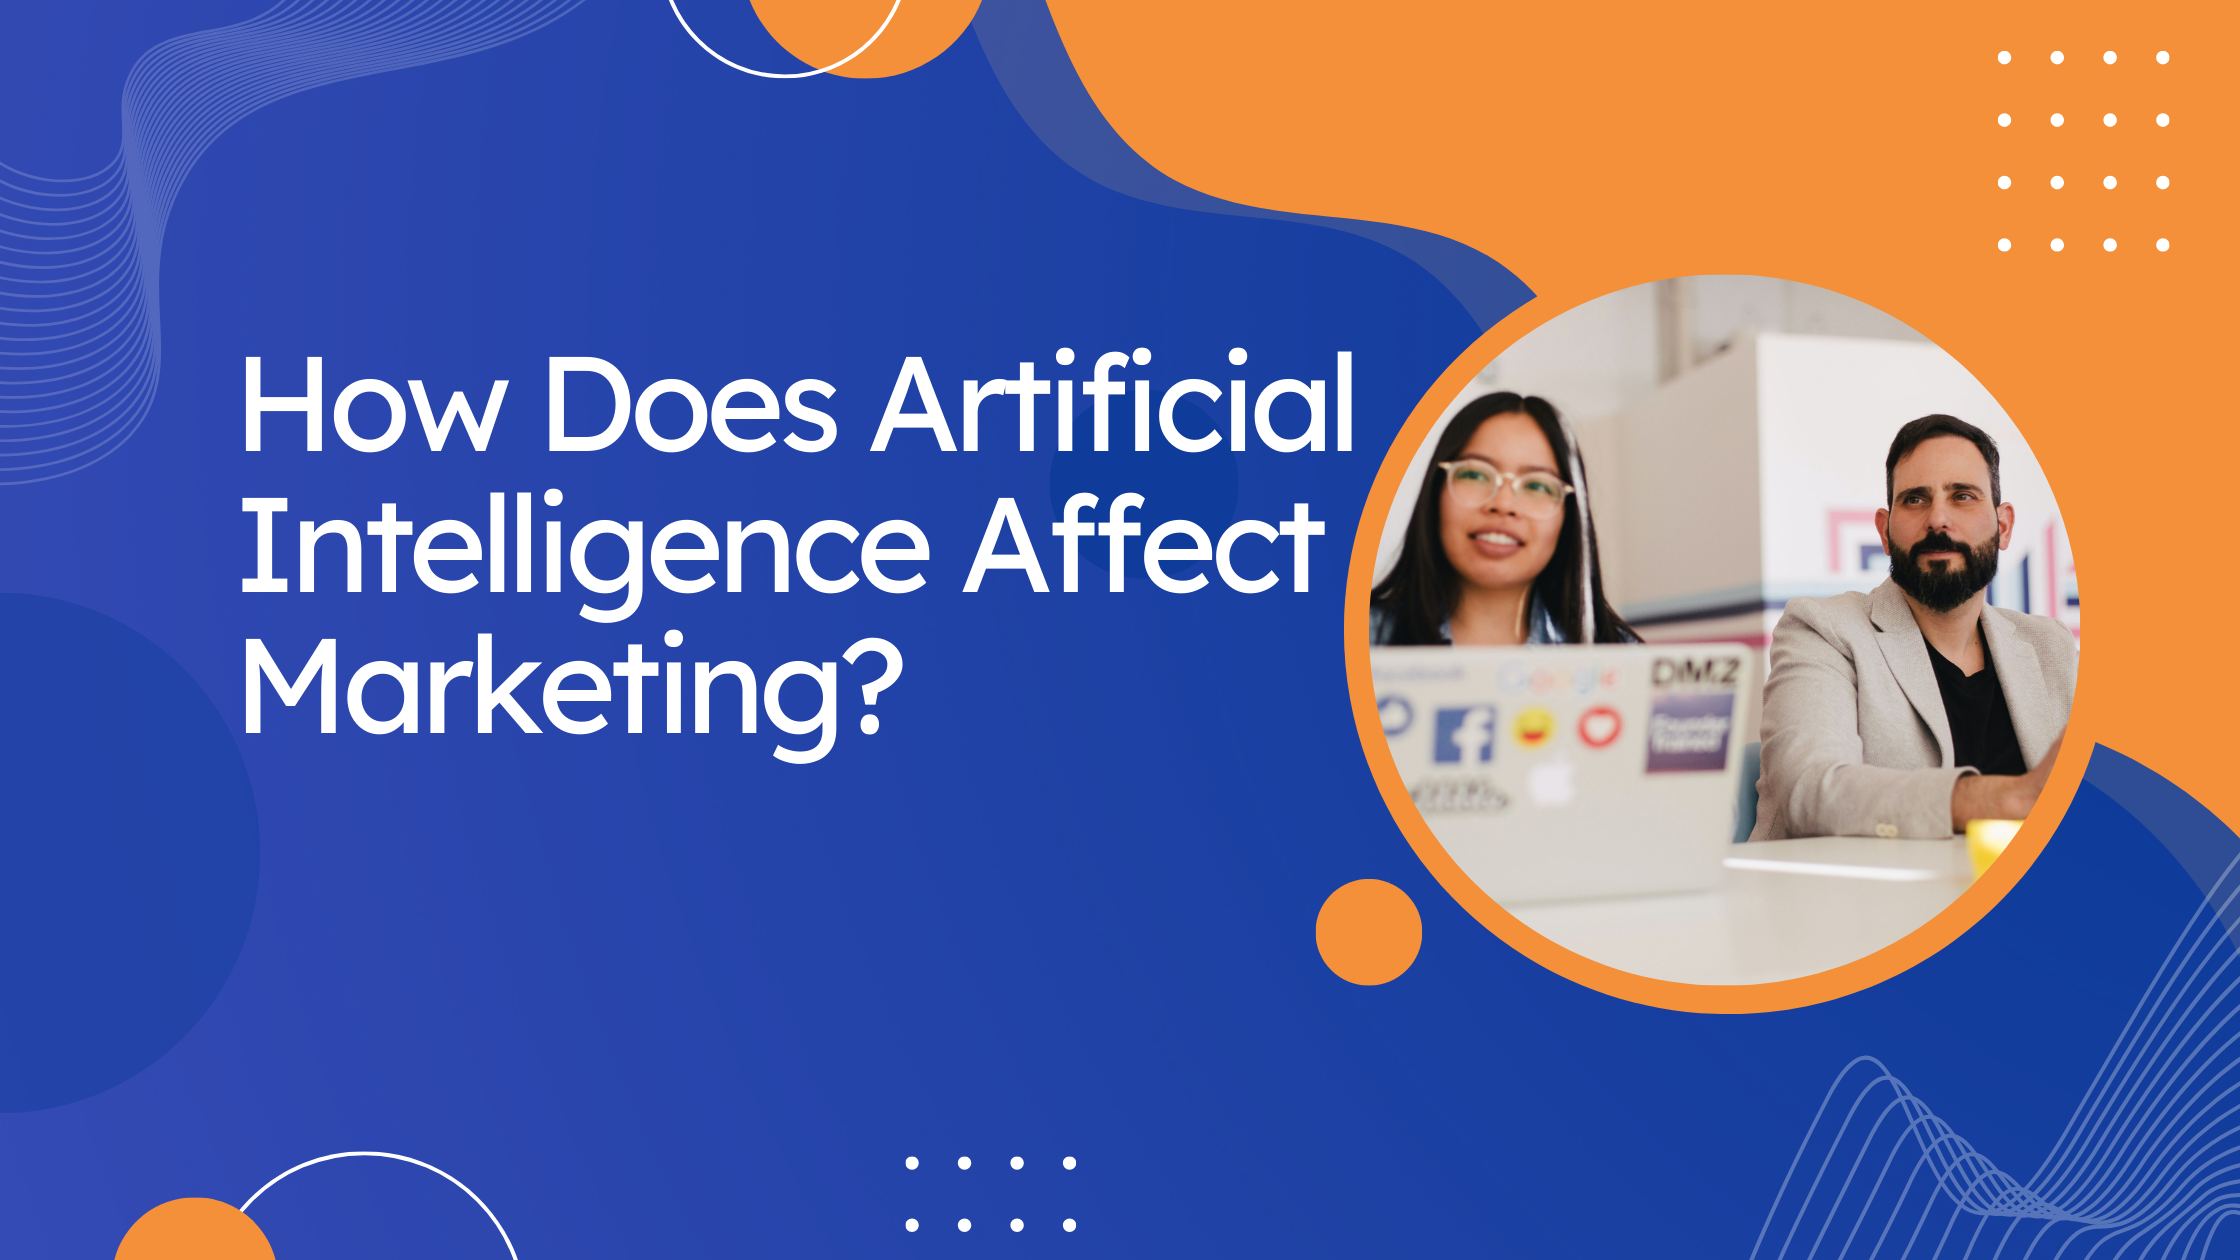 How does artificial intelligence affect marketing